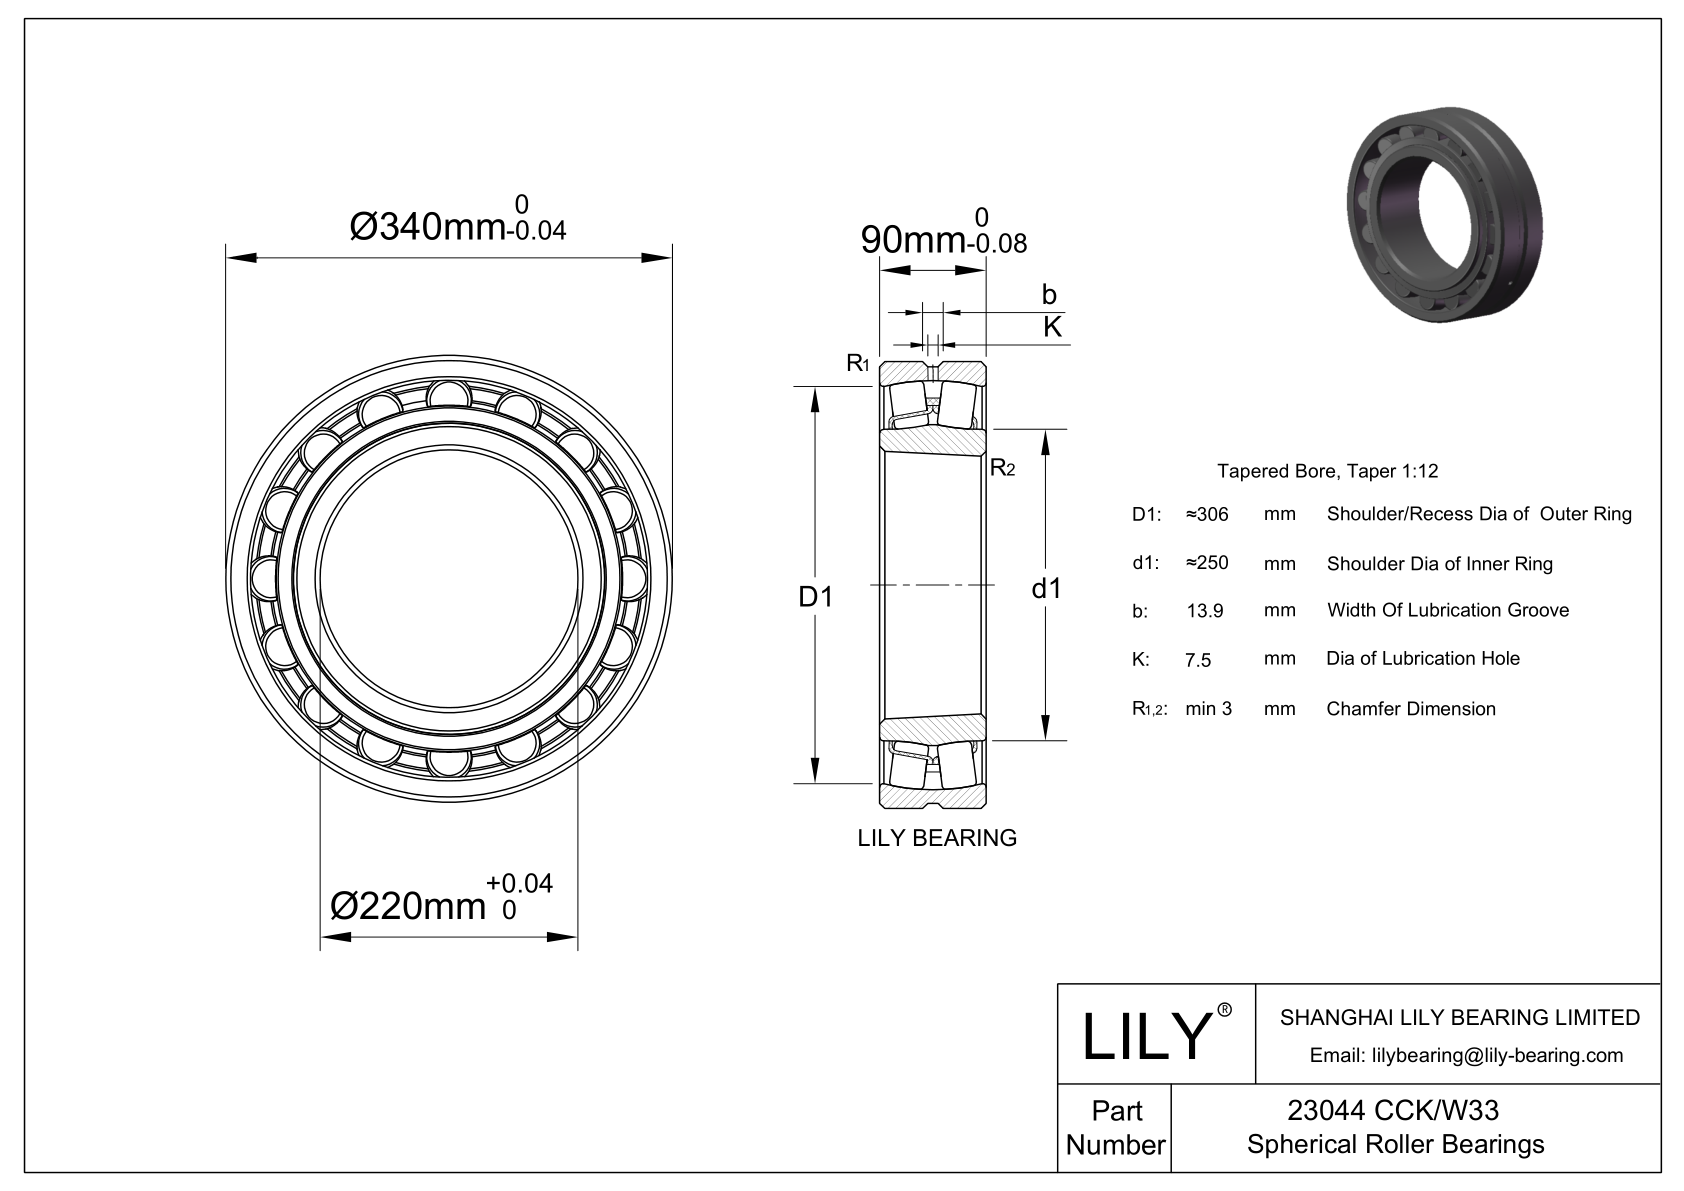 23044 CCK/W33 Double Row Spherical Roller Bearing cad drawing